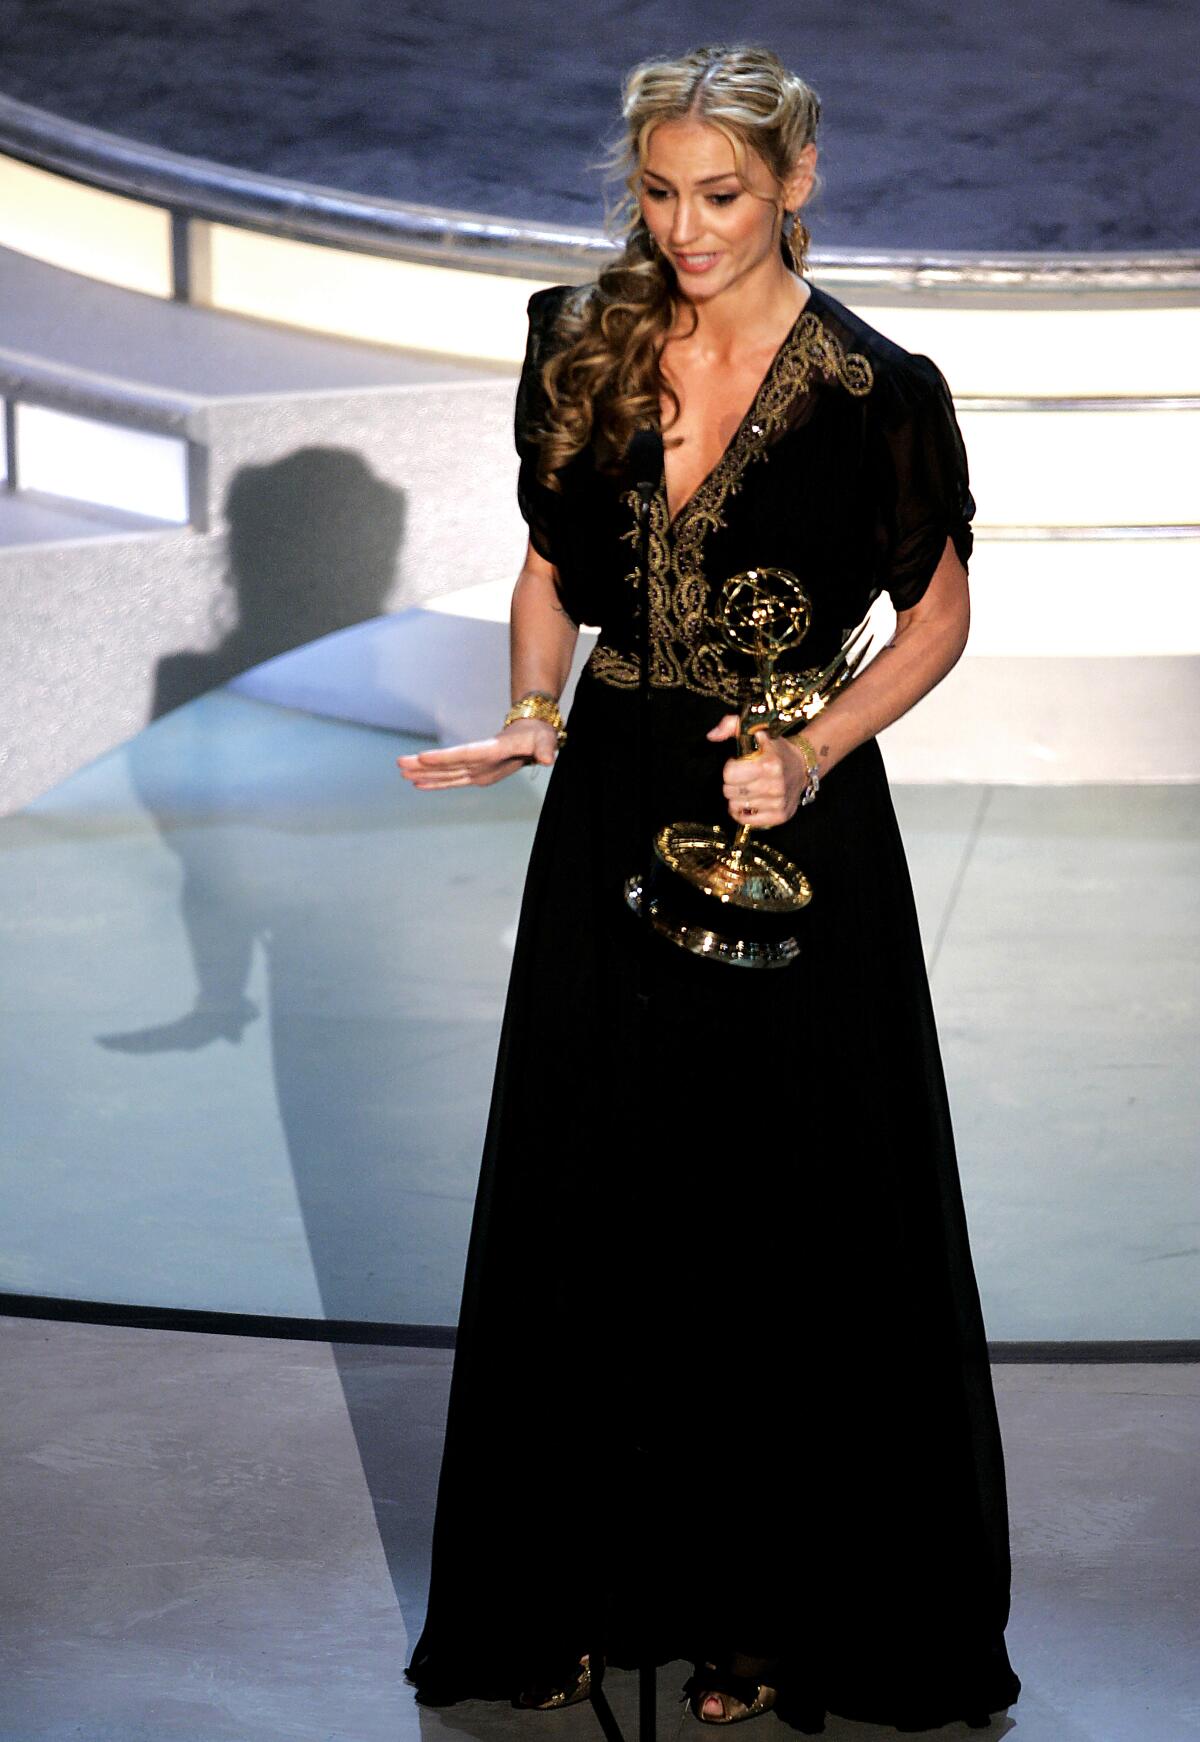 Actor Drea de Matteo wears a black gown and holds an Emmy on stage.